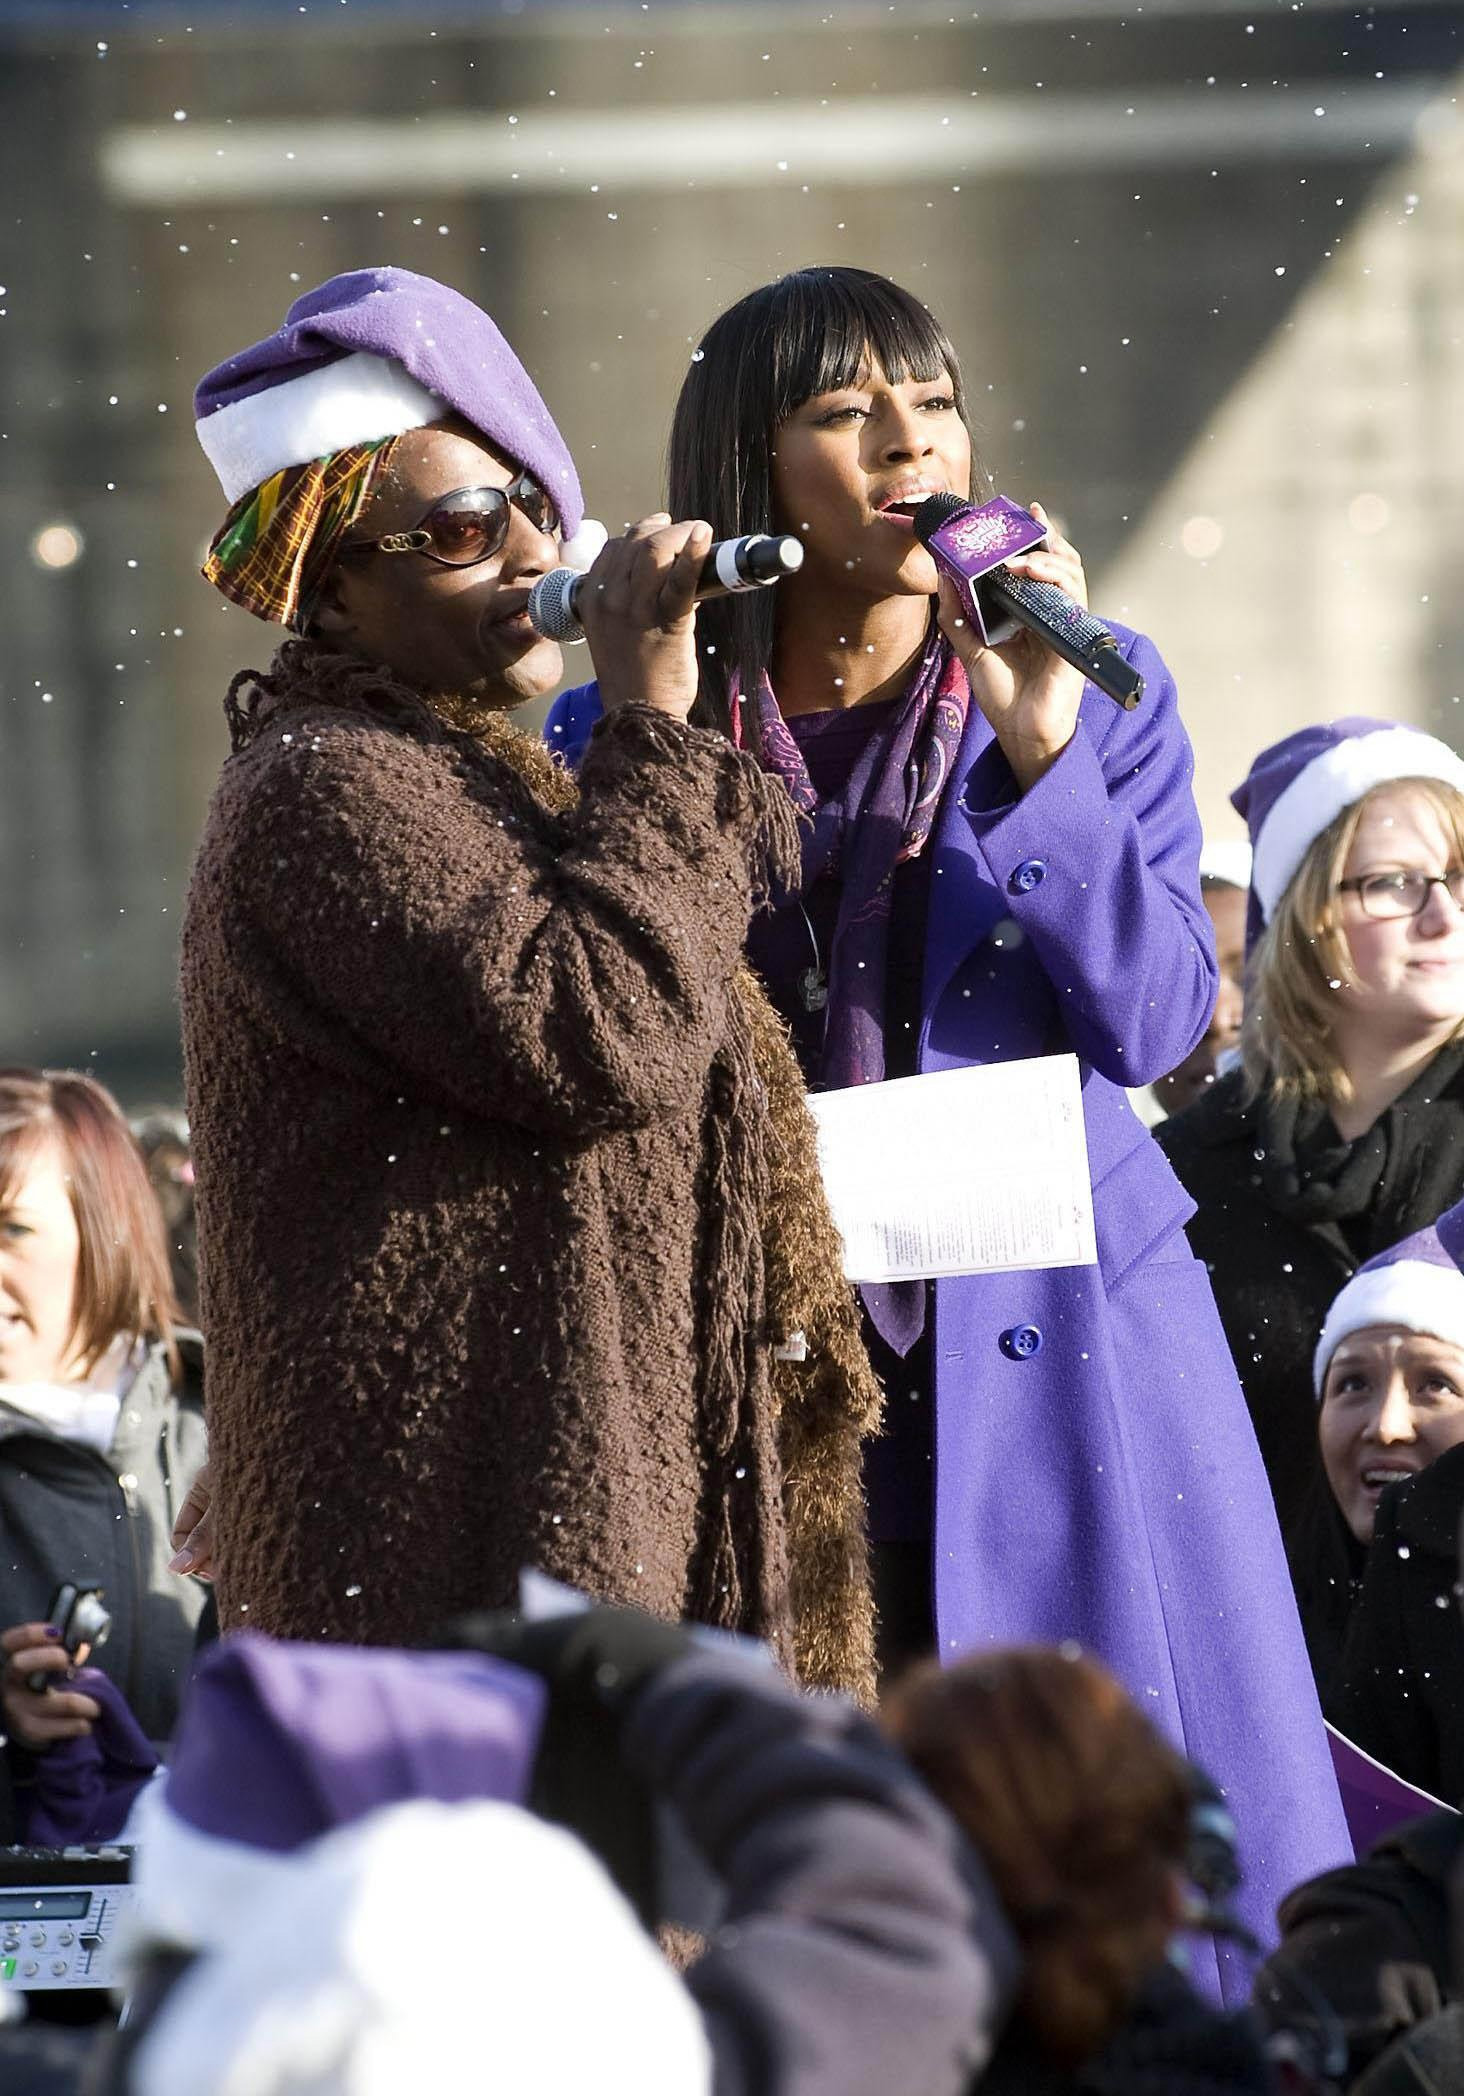 Alexandra Burke and her mother Melissa Bell singing together in 2009